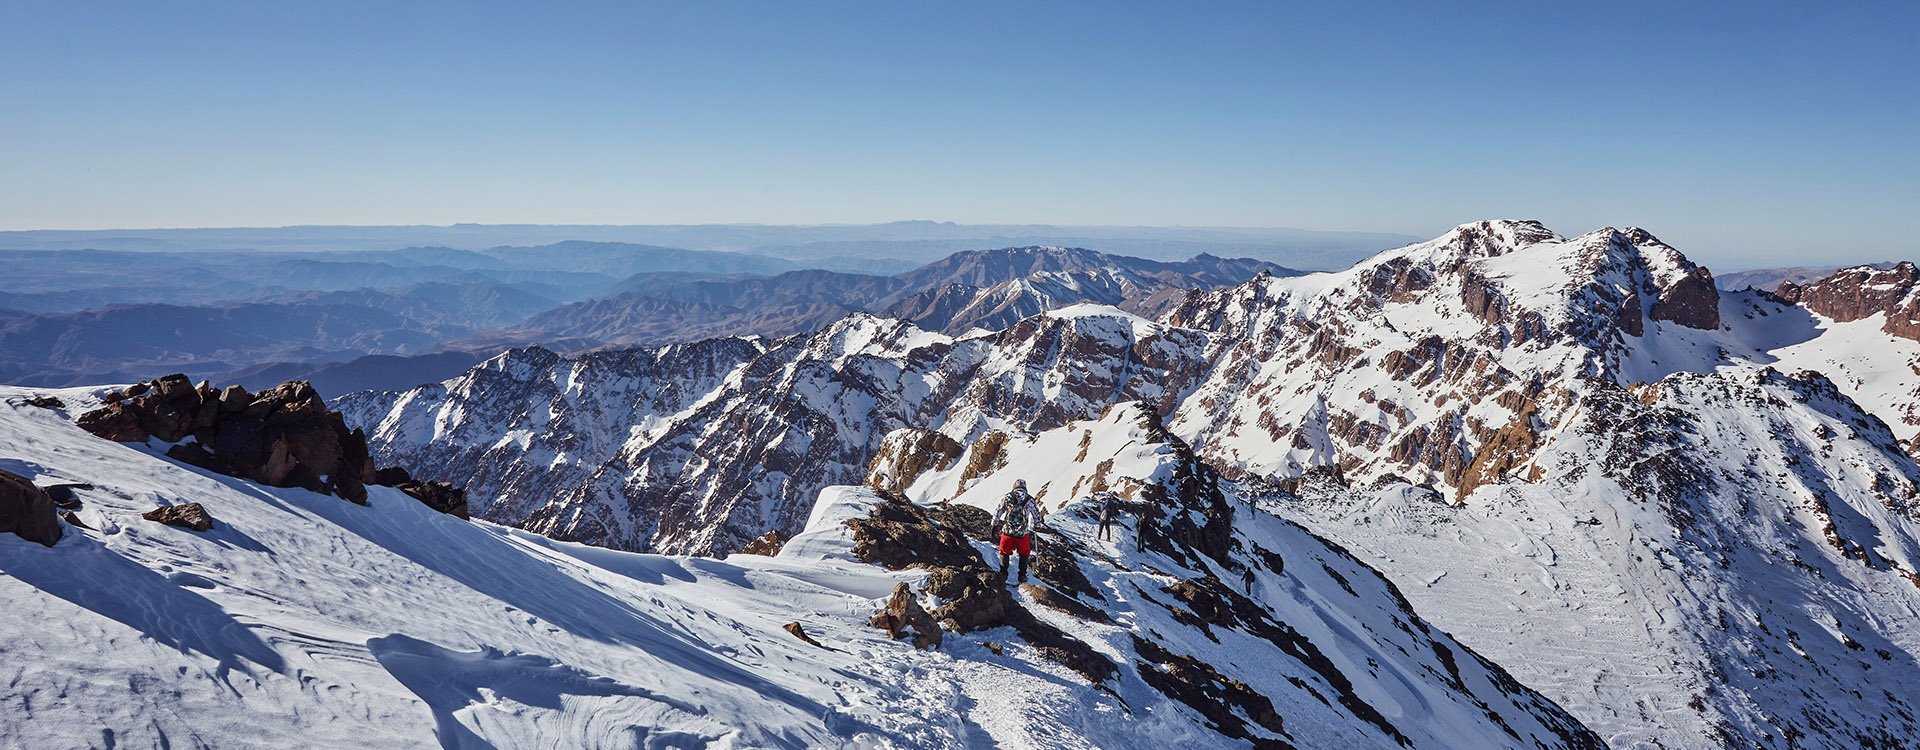 Toubkal national park, Morocco seen from Jebel Toubkal highest peak of Atlas mountains and Morocco